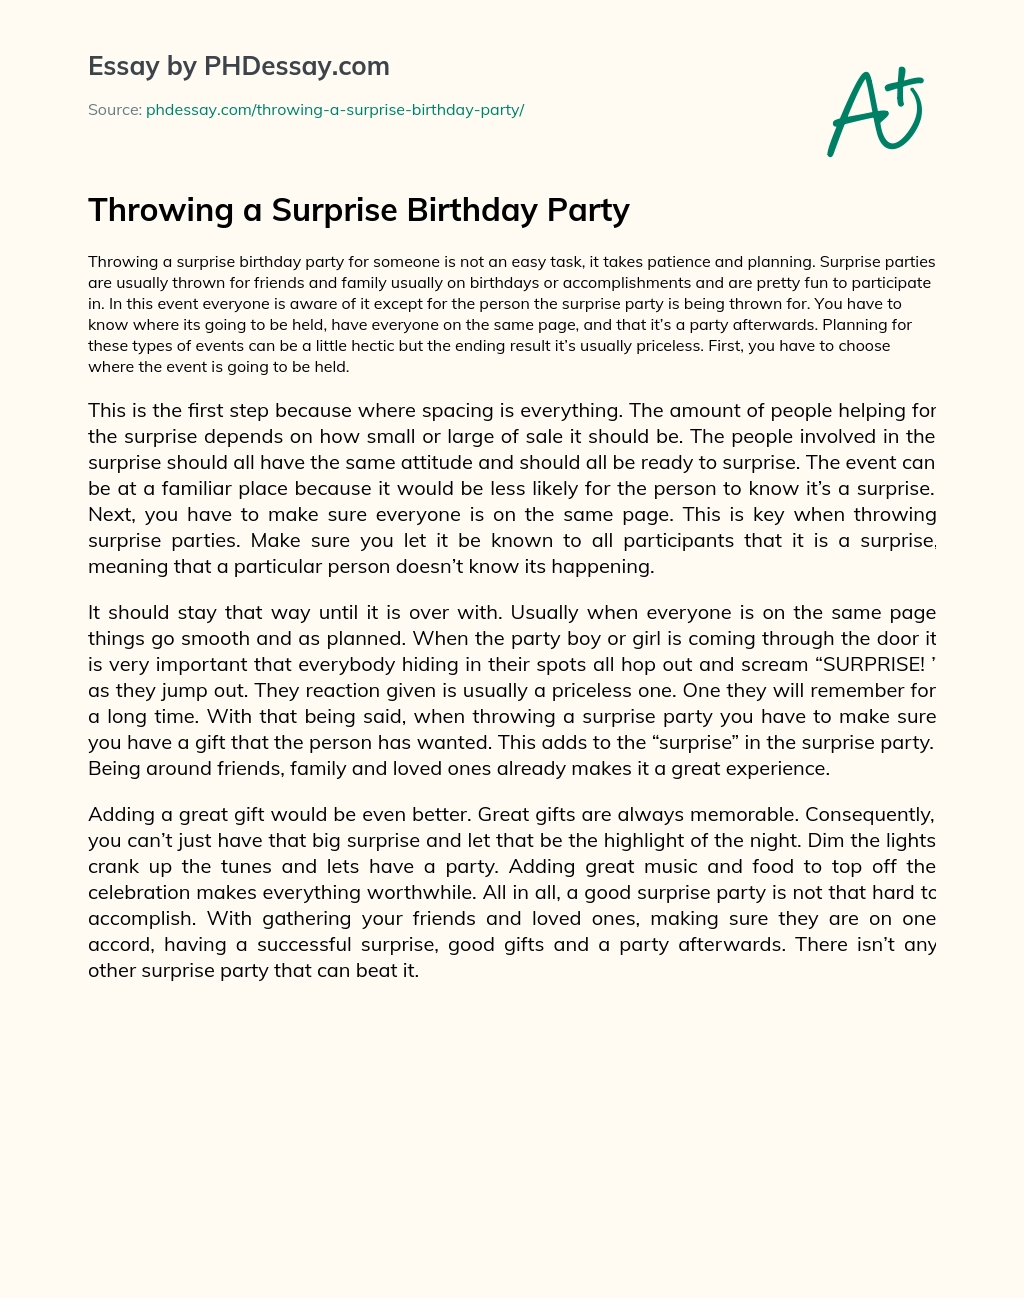 Throwing a Surprise Birthday Party essay